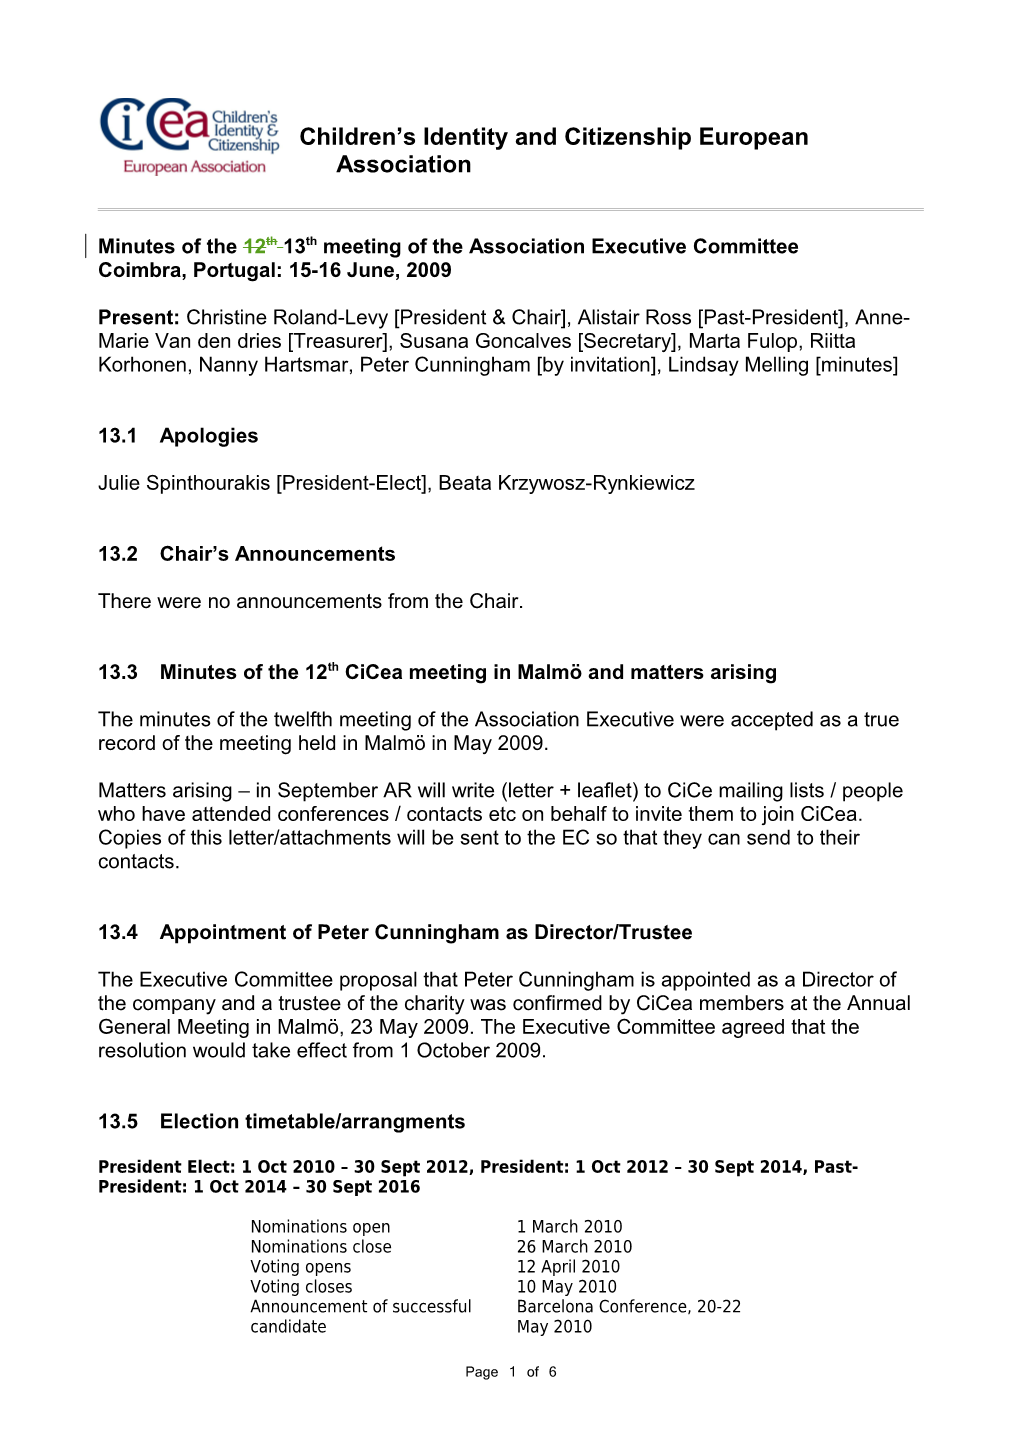 Minutes of the 3Rd Meeting of the Executive Committee